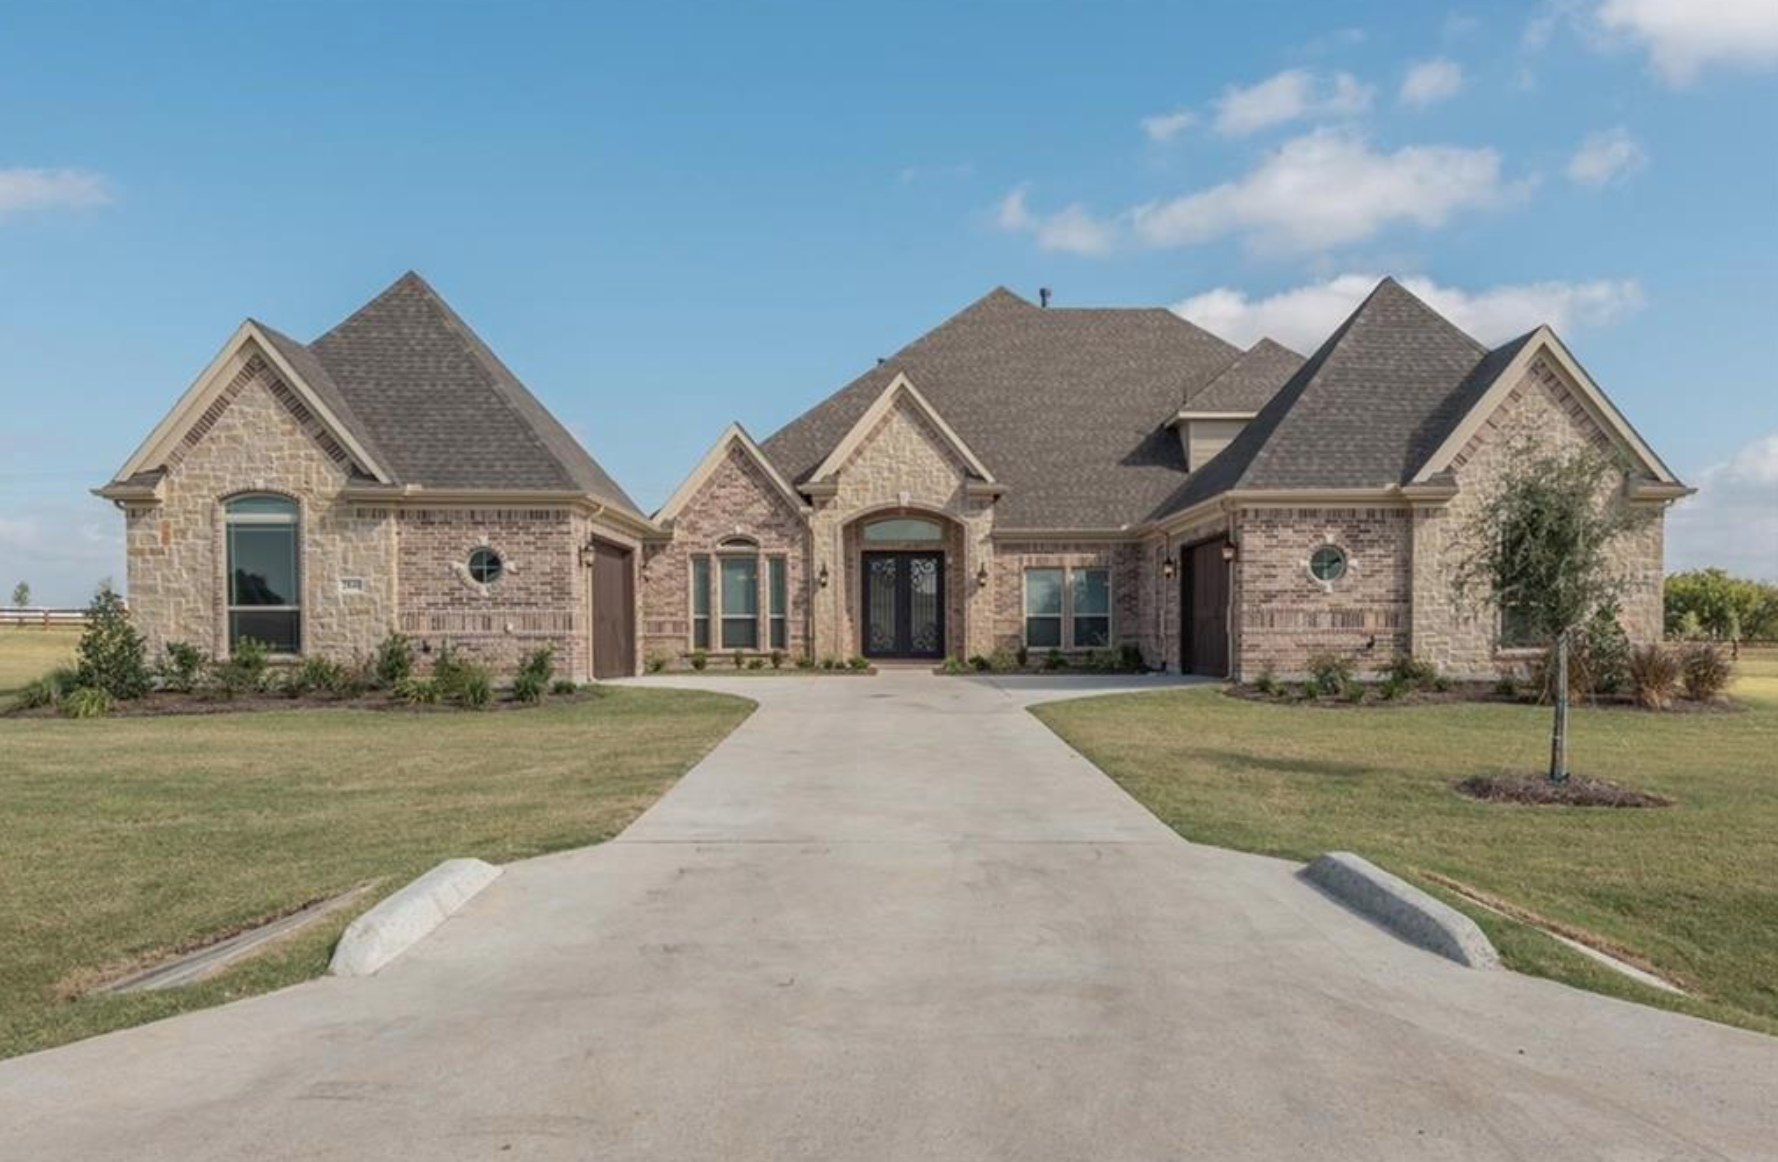 Newest Homes for Sale in Denton County